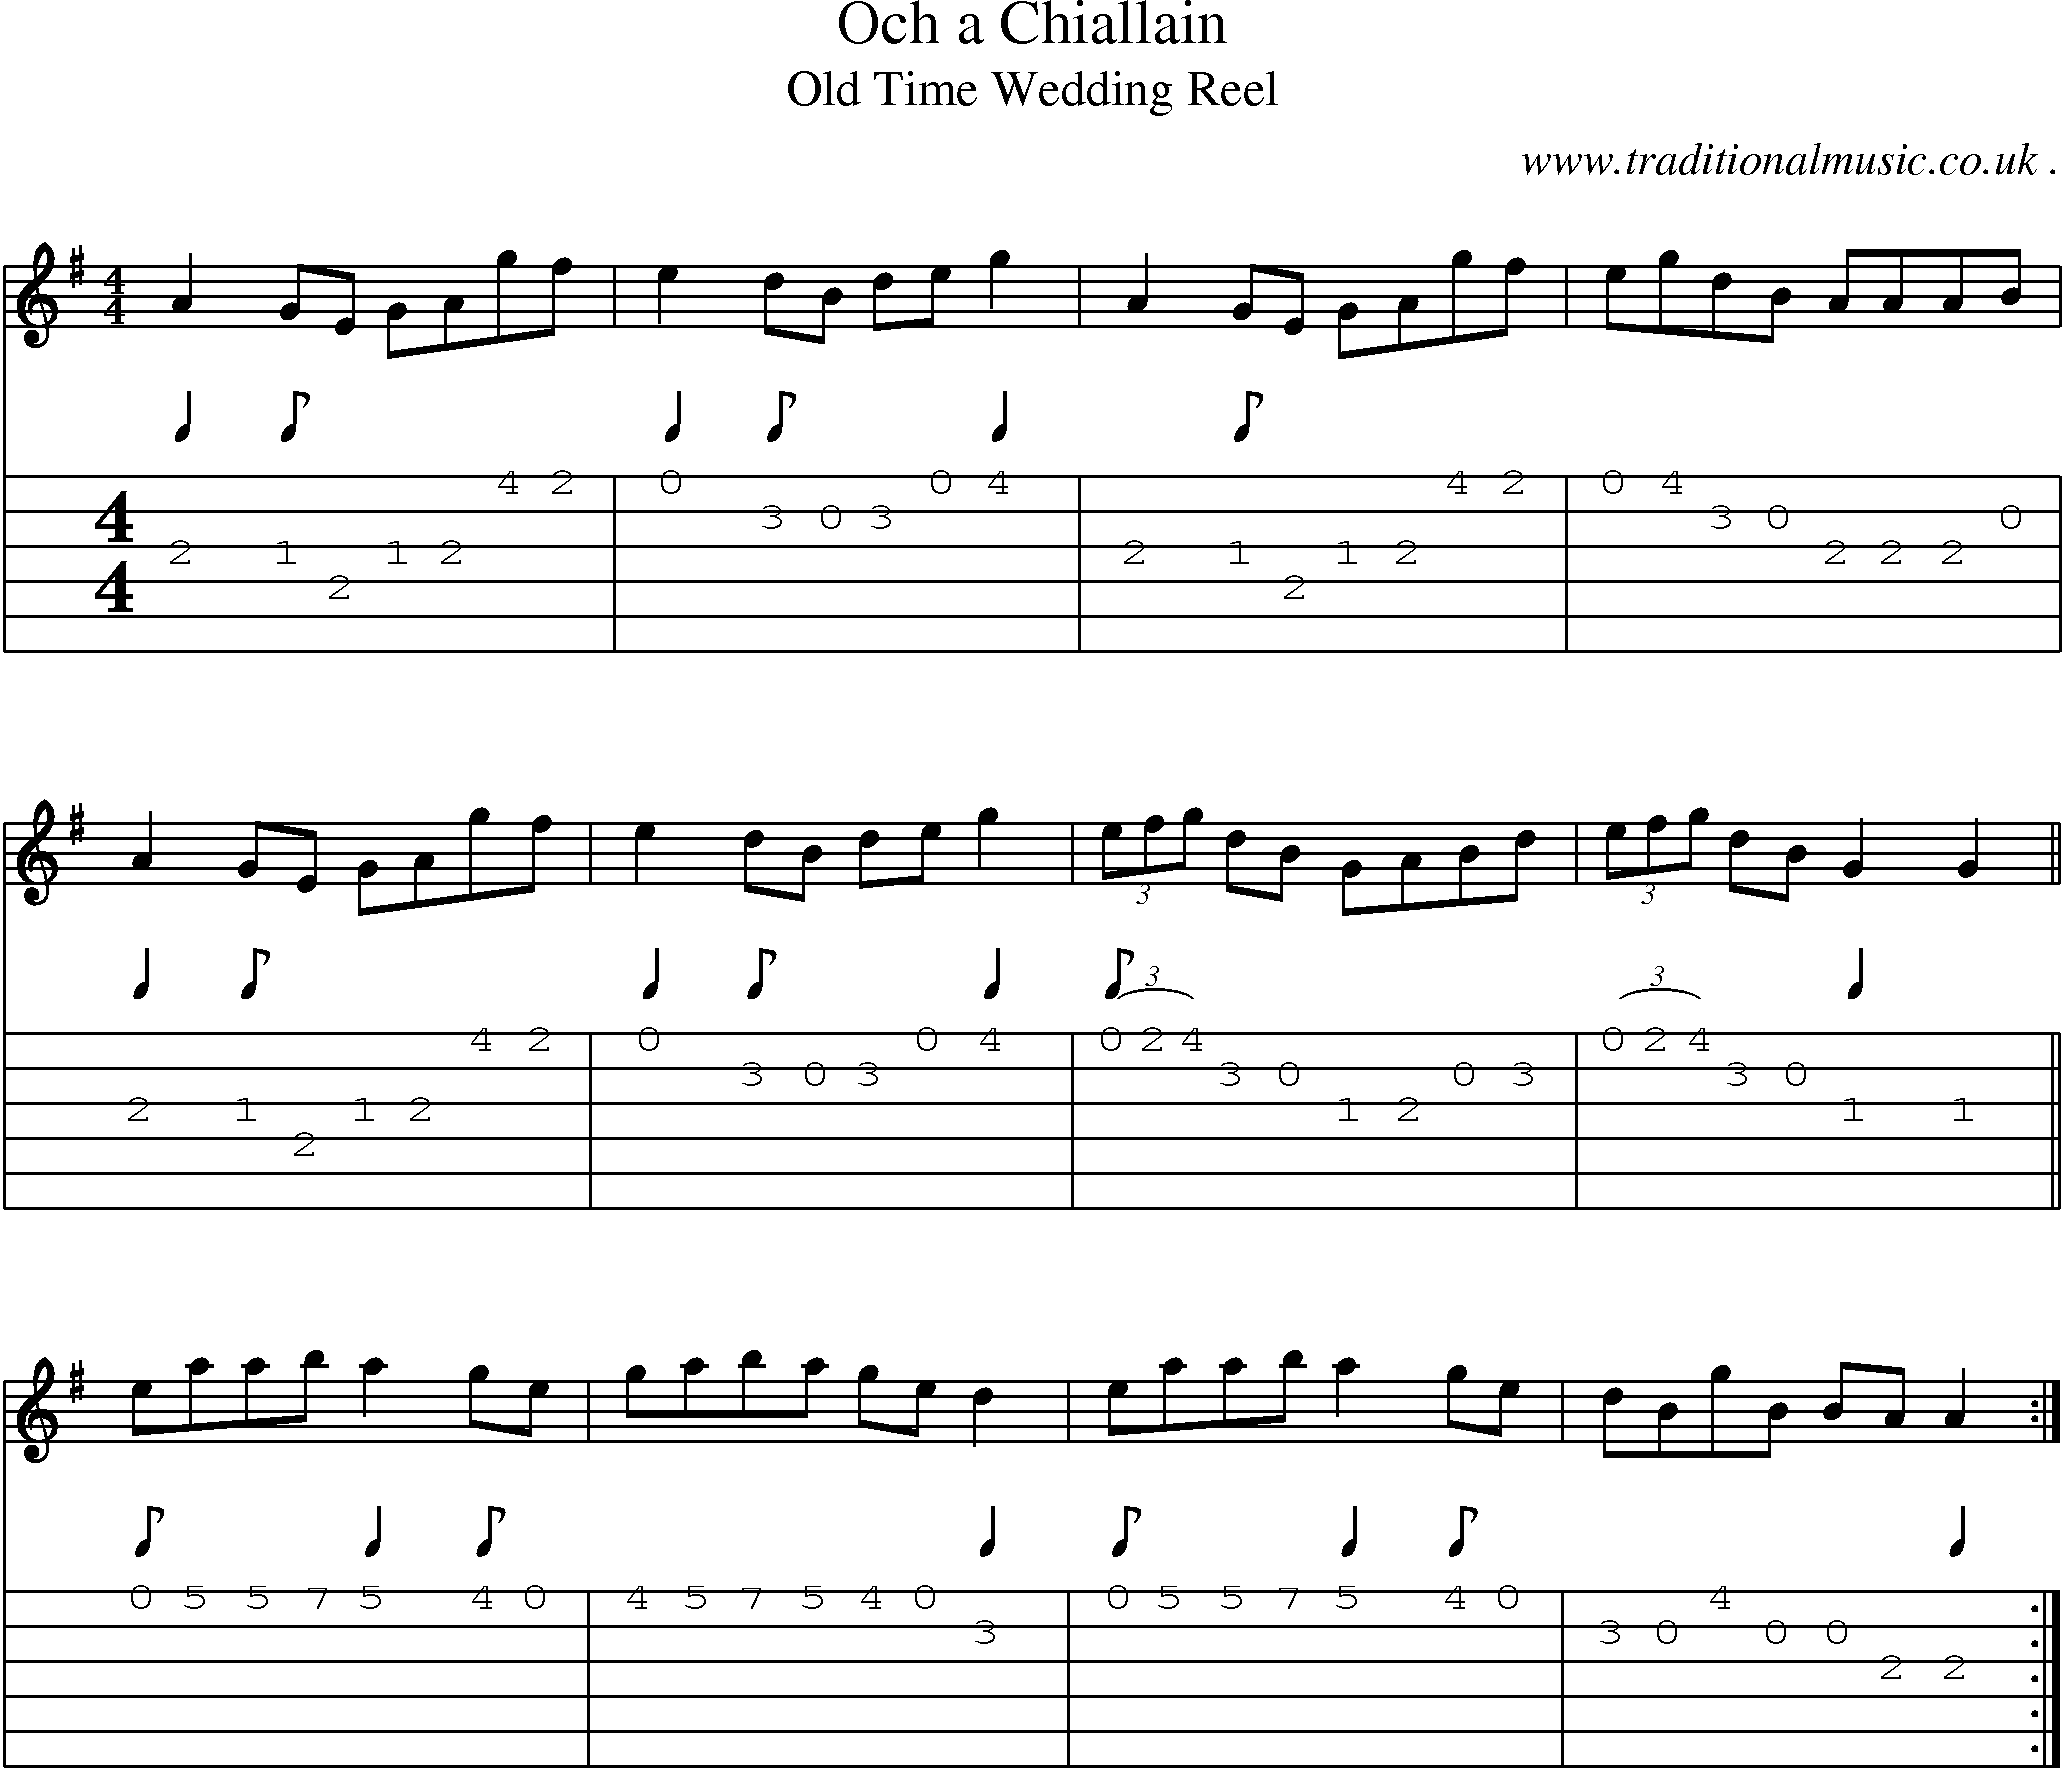 Music Score and Guitar Tabs for Och A Chiallain